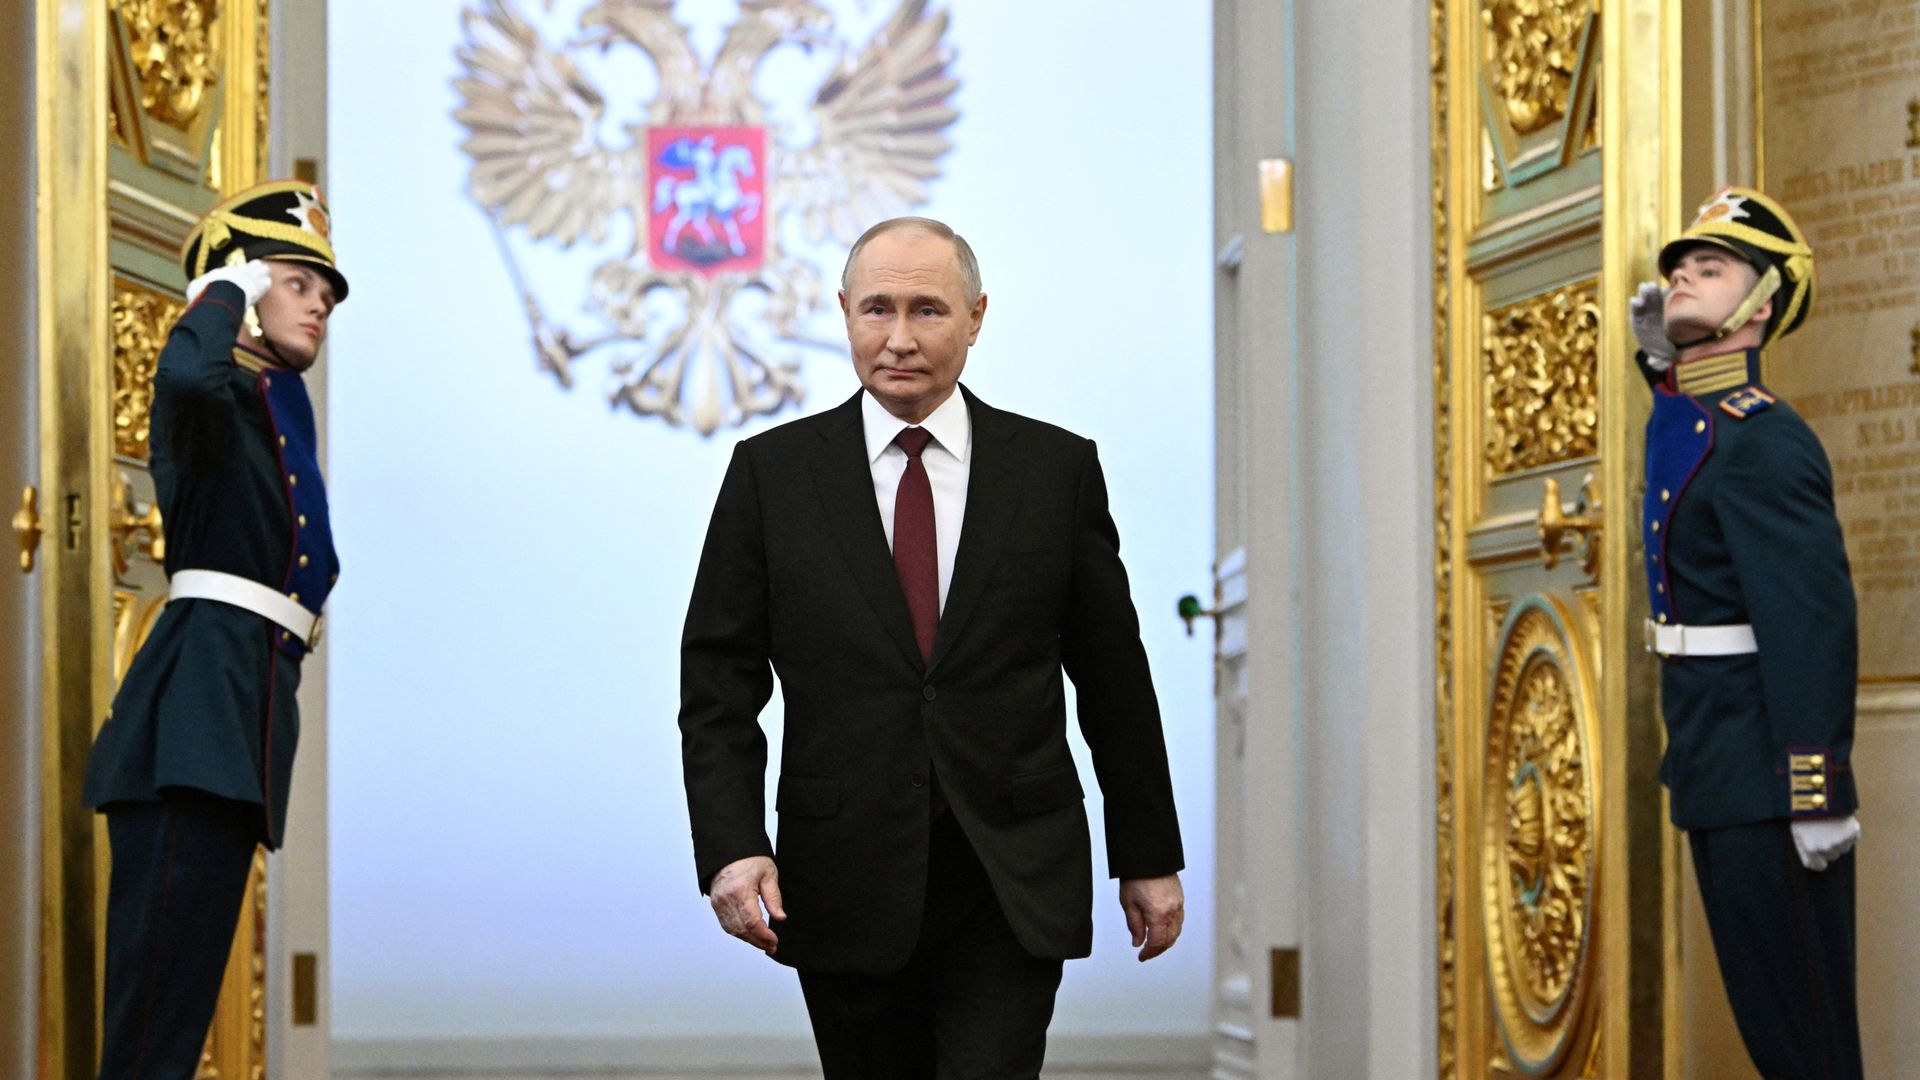 Putin thanks soldiers 'fighting for motherland' as he is inaugurated for fifth time...